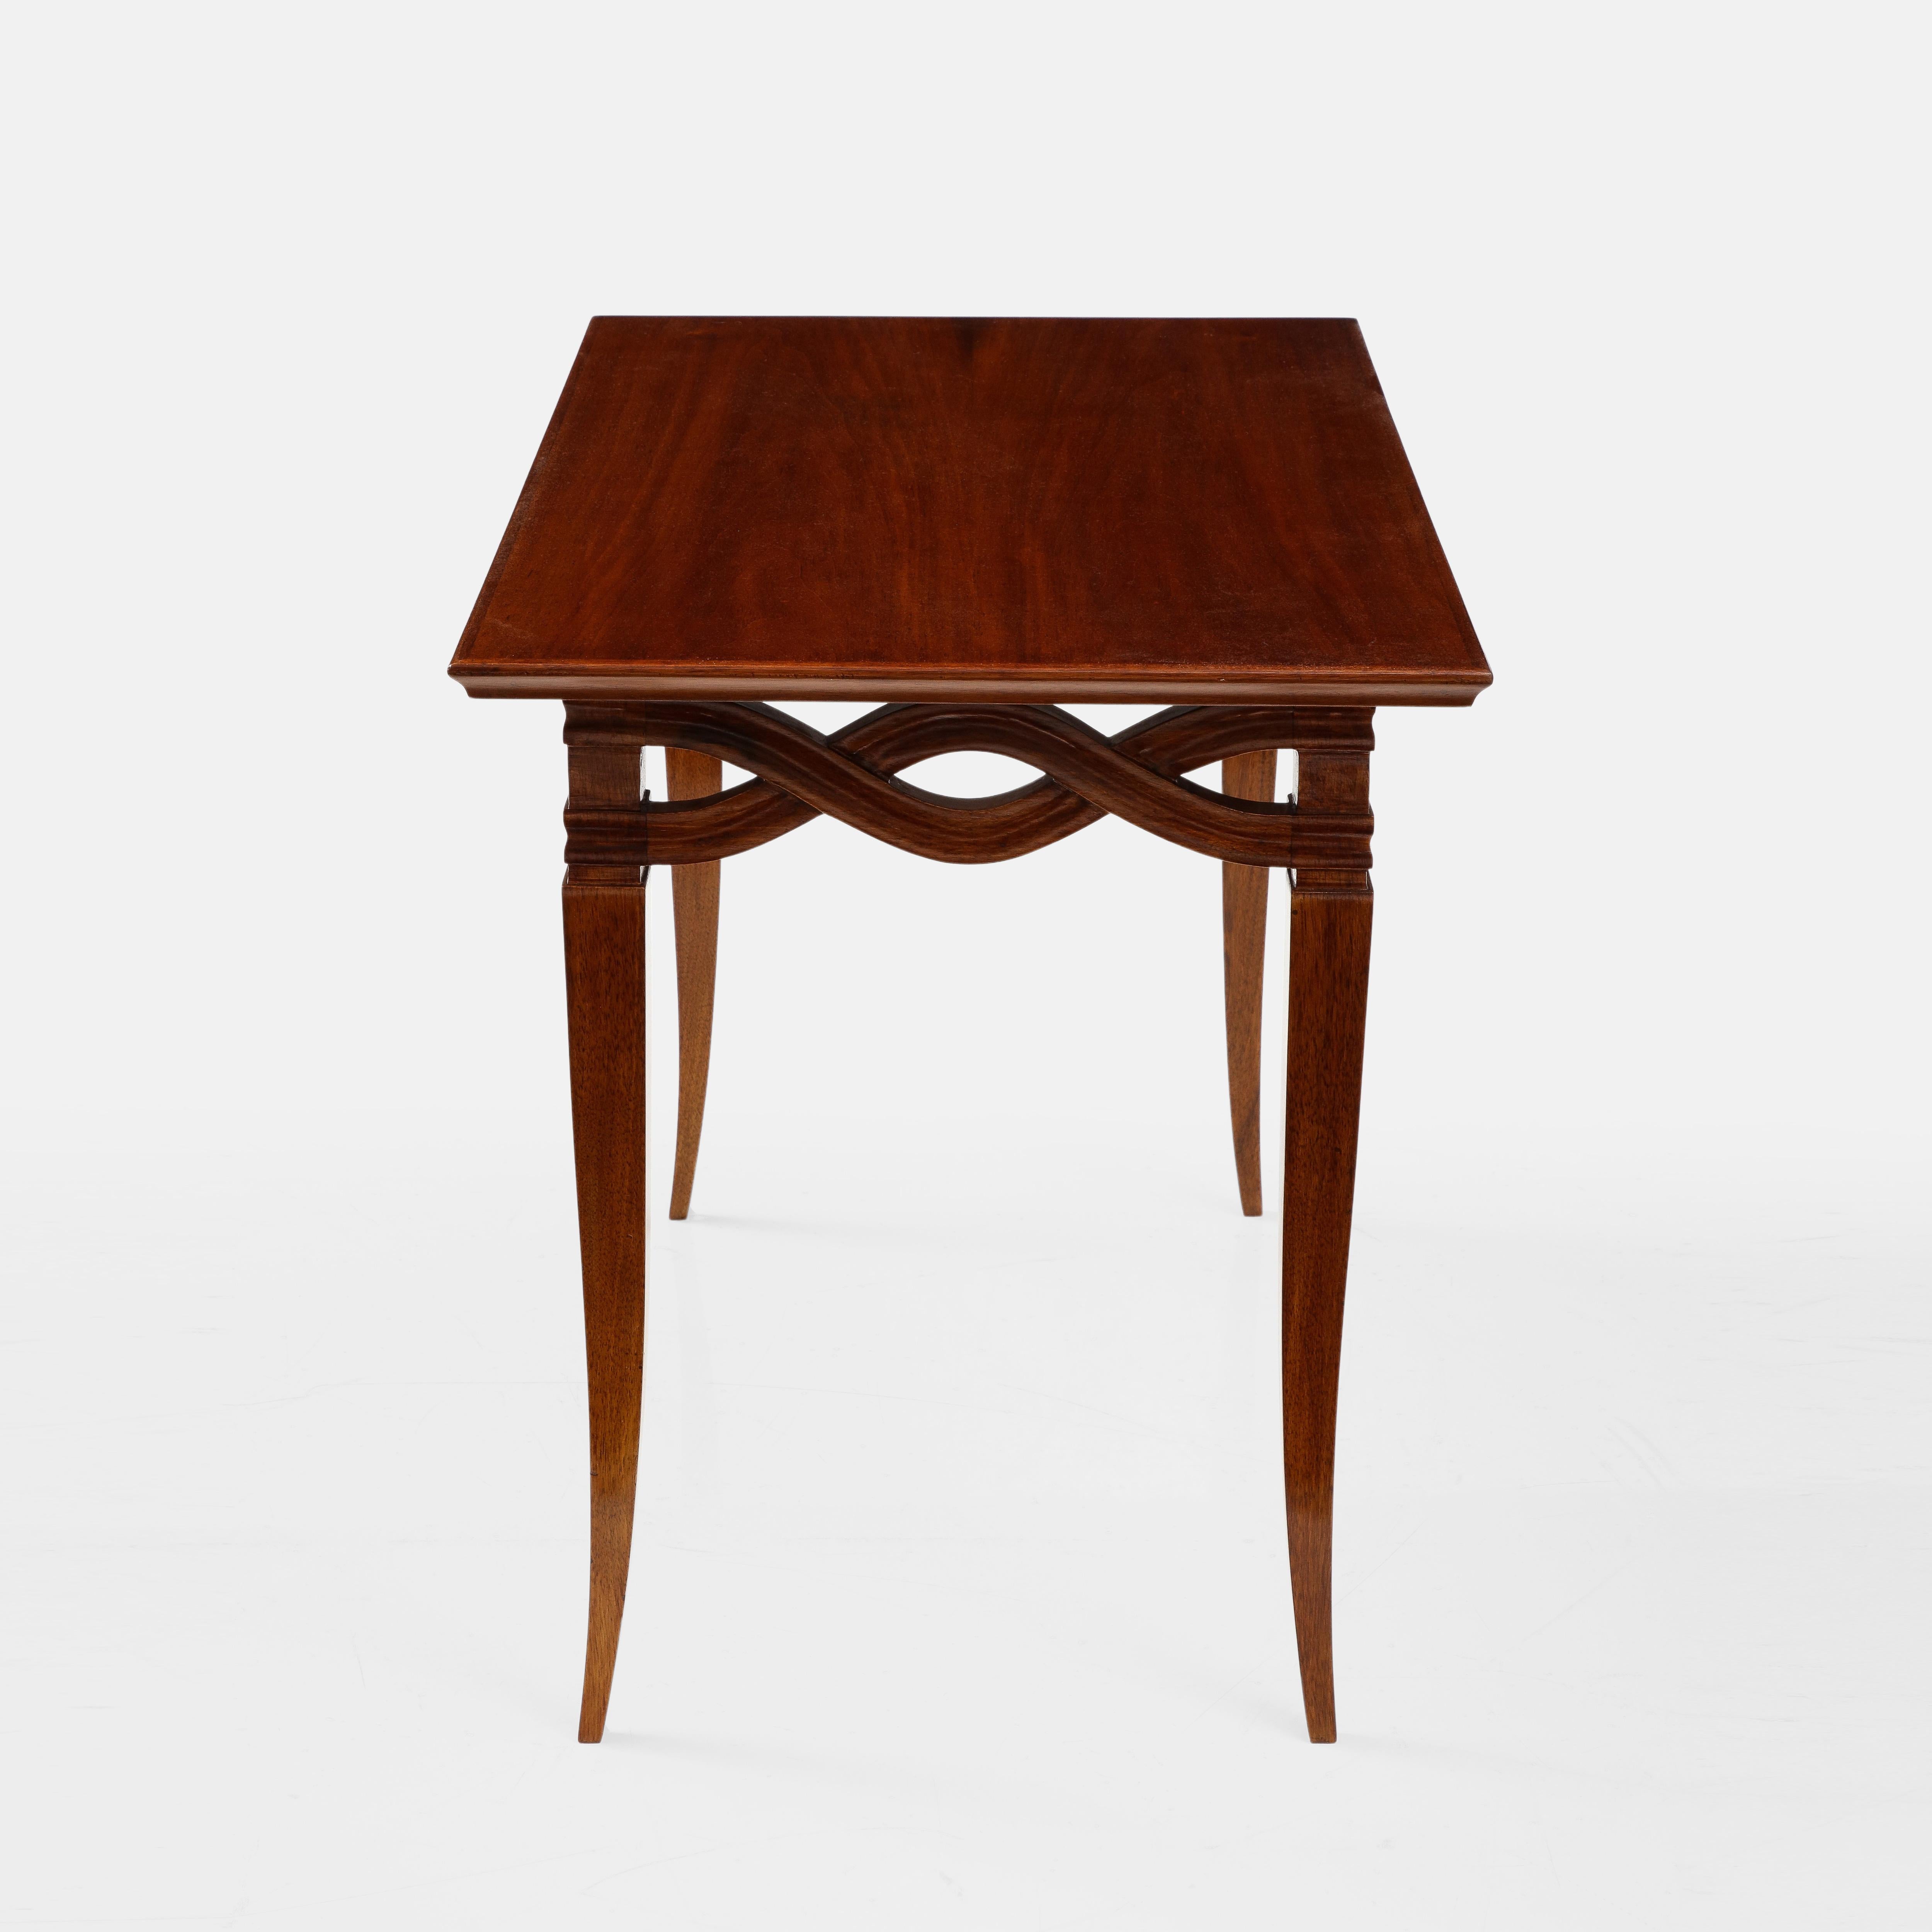 Rare Small Walnut Coffee or Side Table Attributed to Paolo Buffa, Italy, 1940s (Italienisch) im Angebot